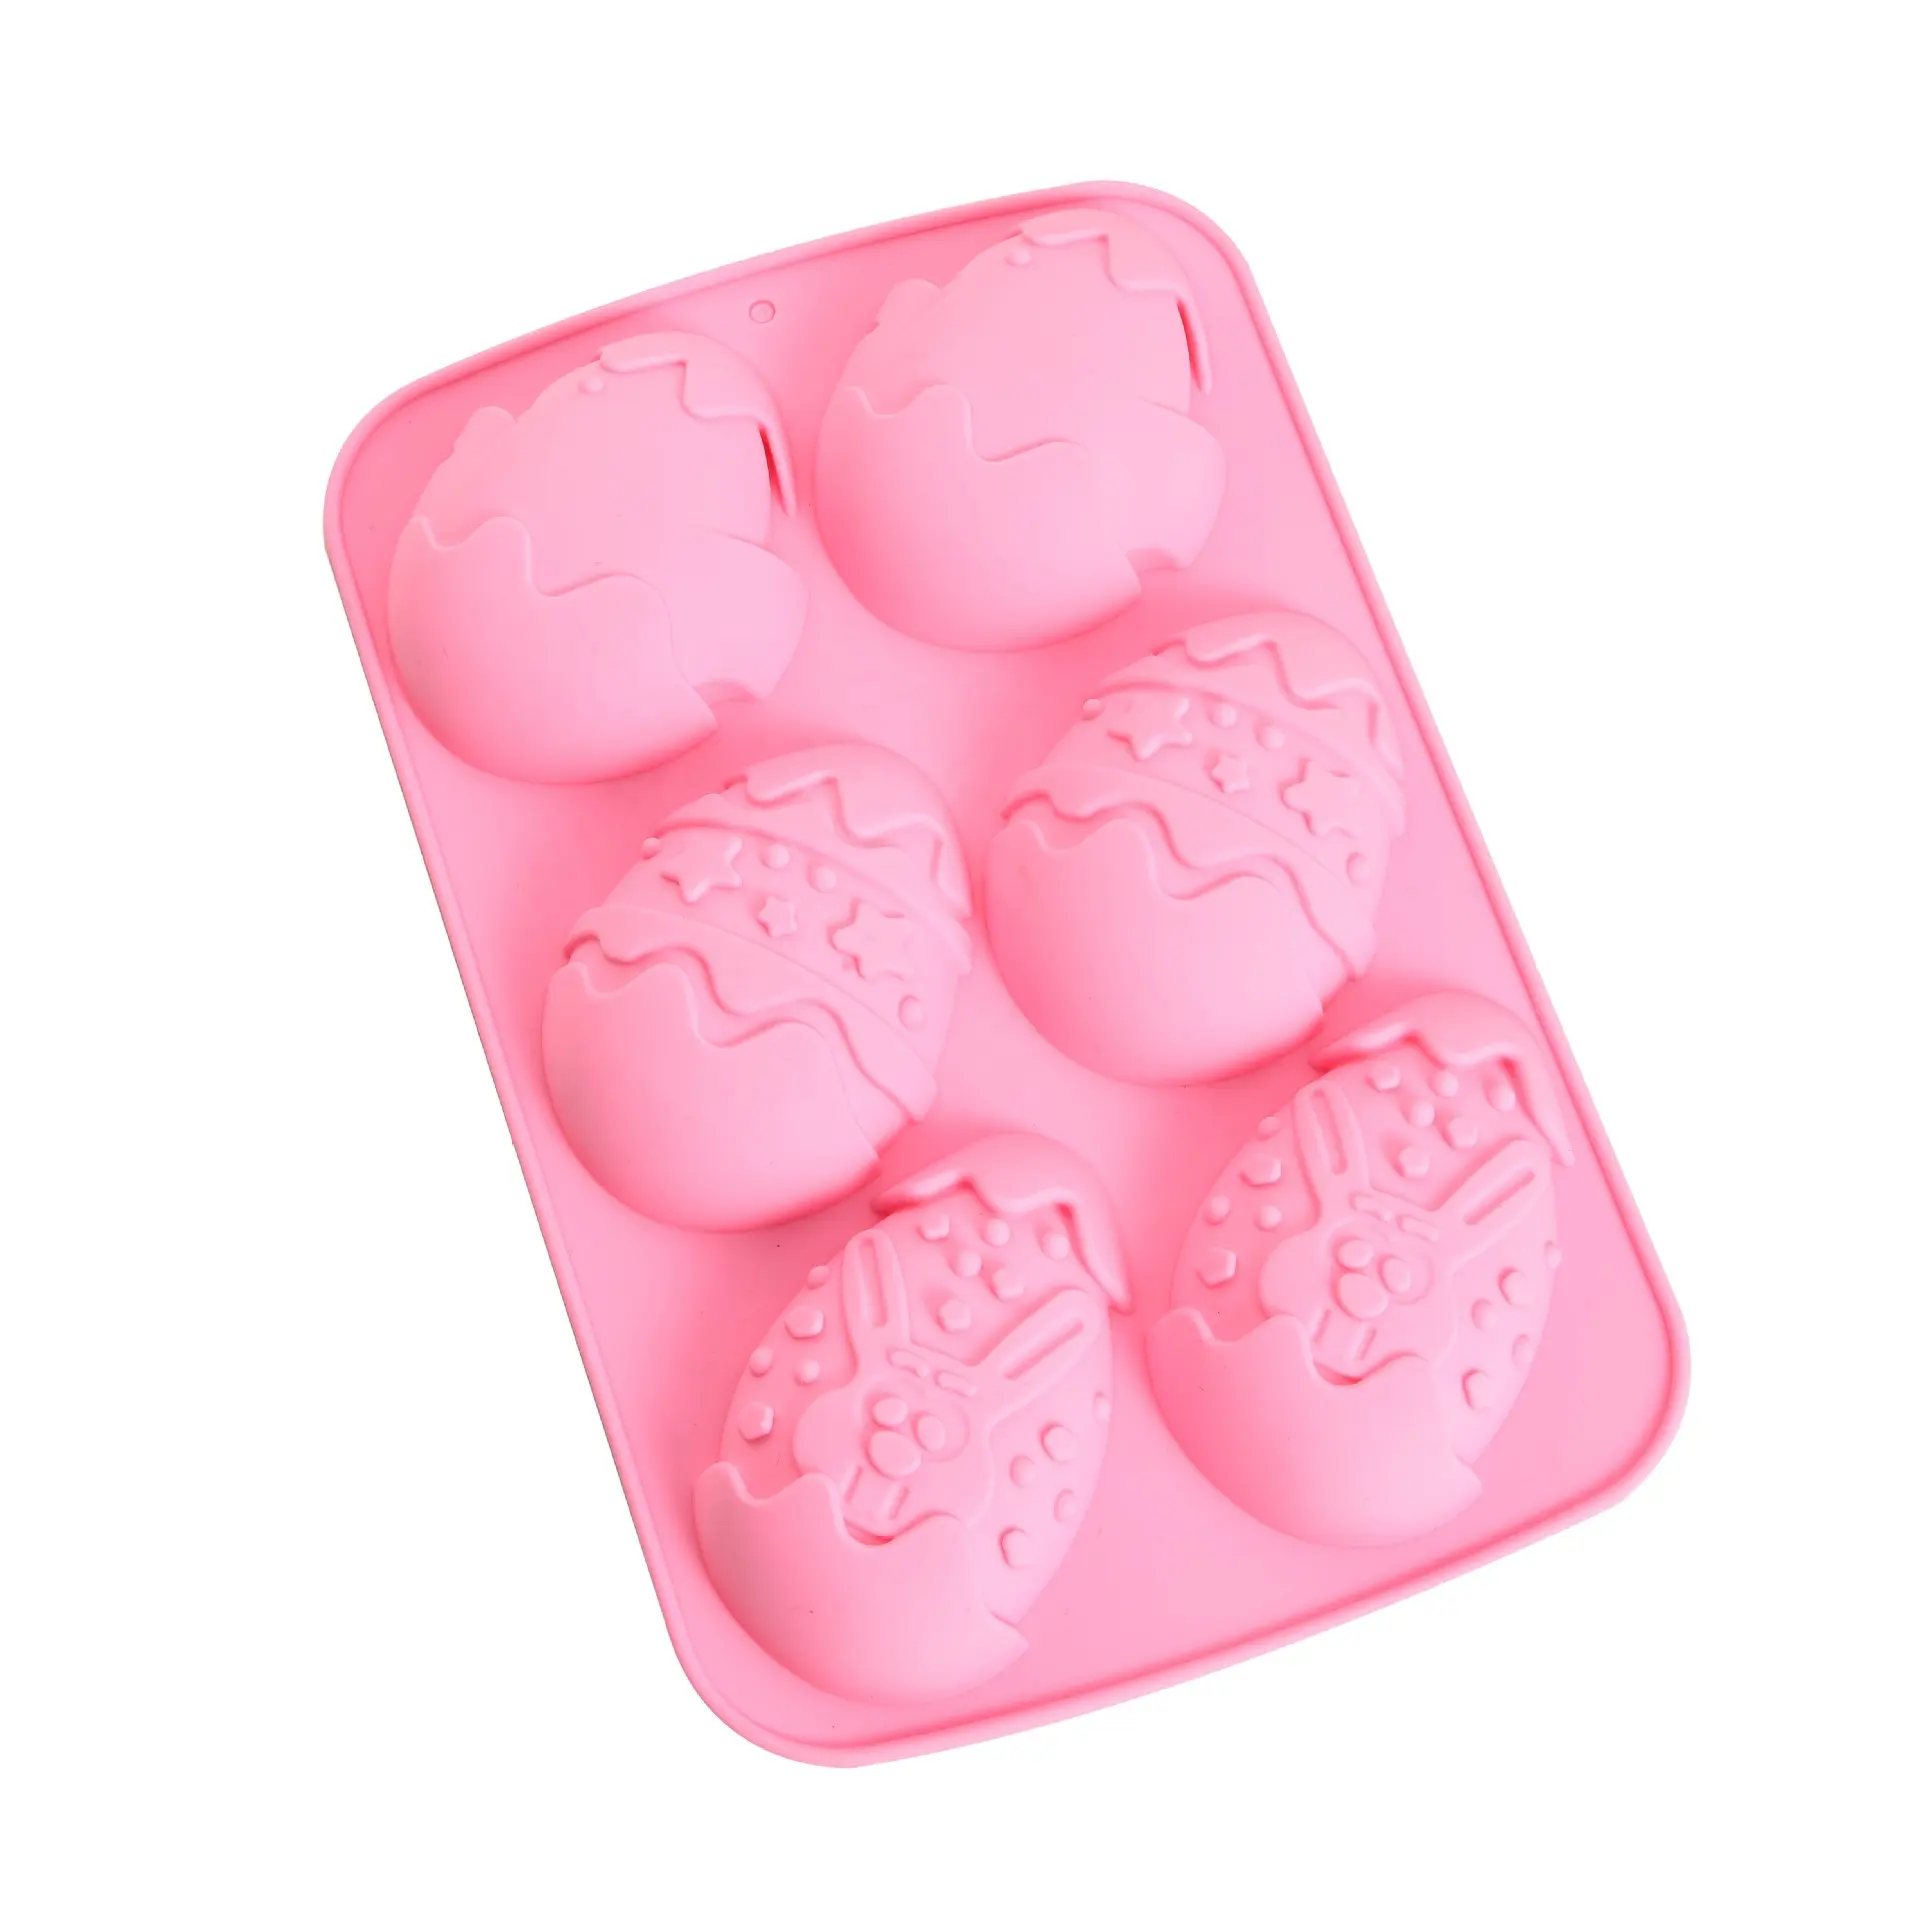 Hot Selling Products 2023 6 Holes Cute Egg Shaped Cake Silicone Mold For Cake Decorating Cake Tools